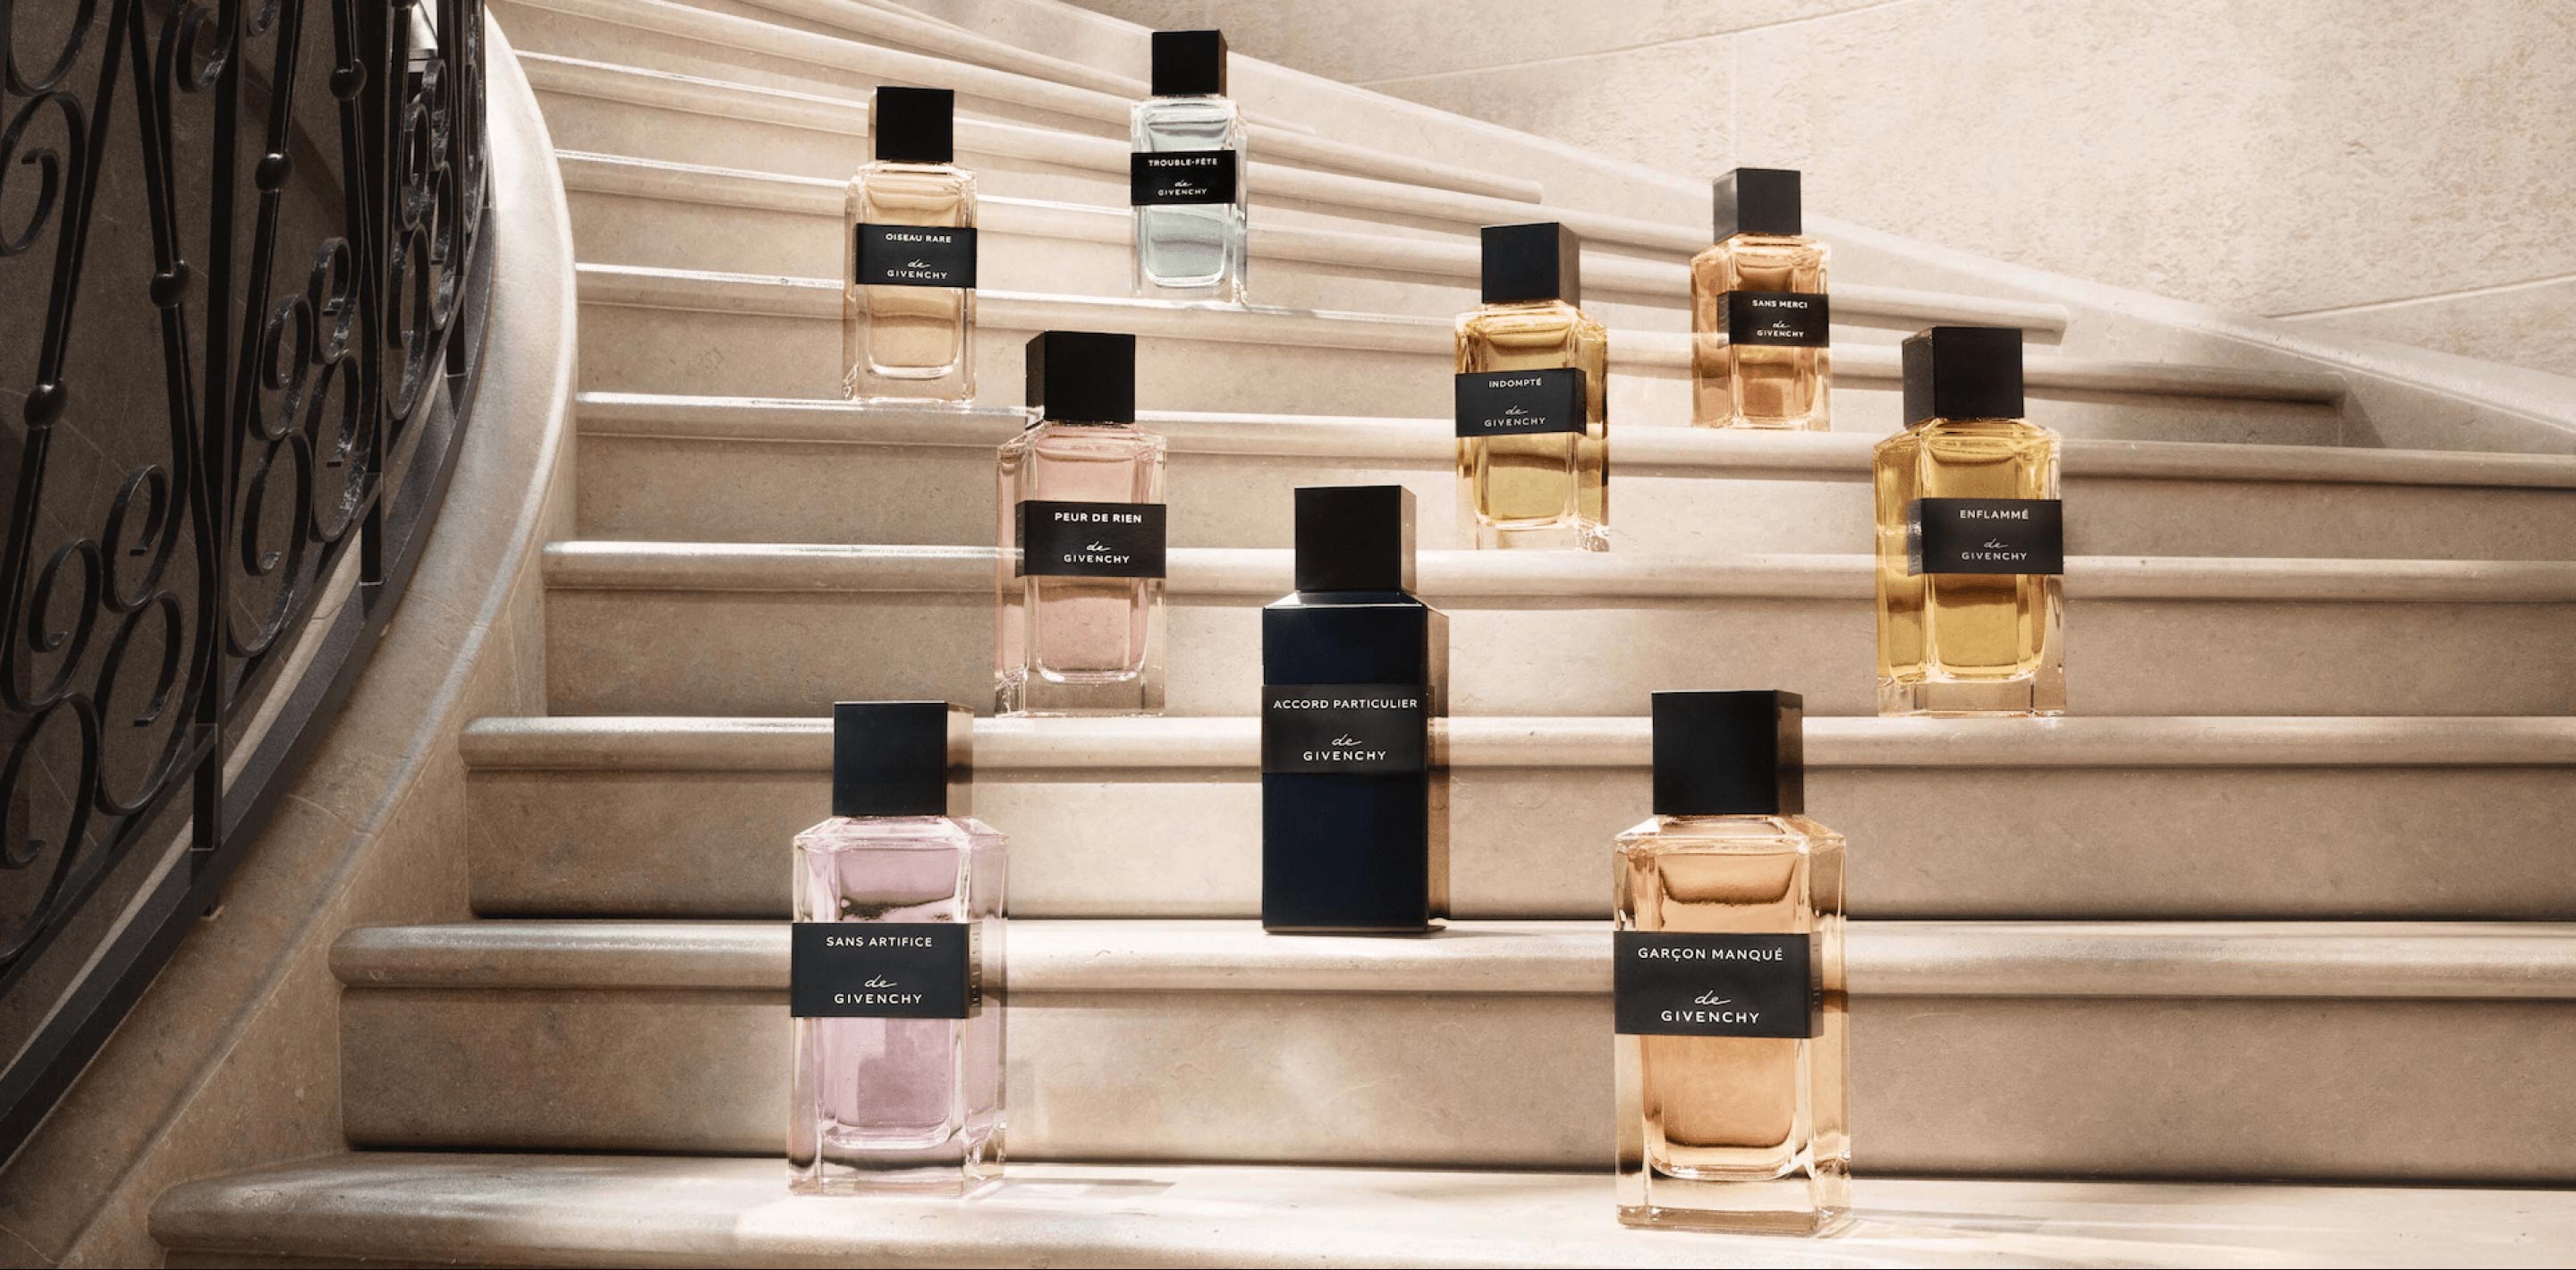 Top 59+ imagen givenchy products